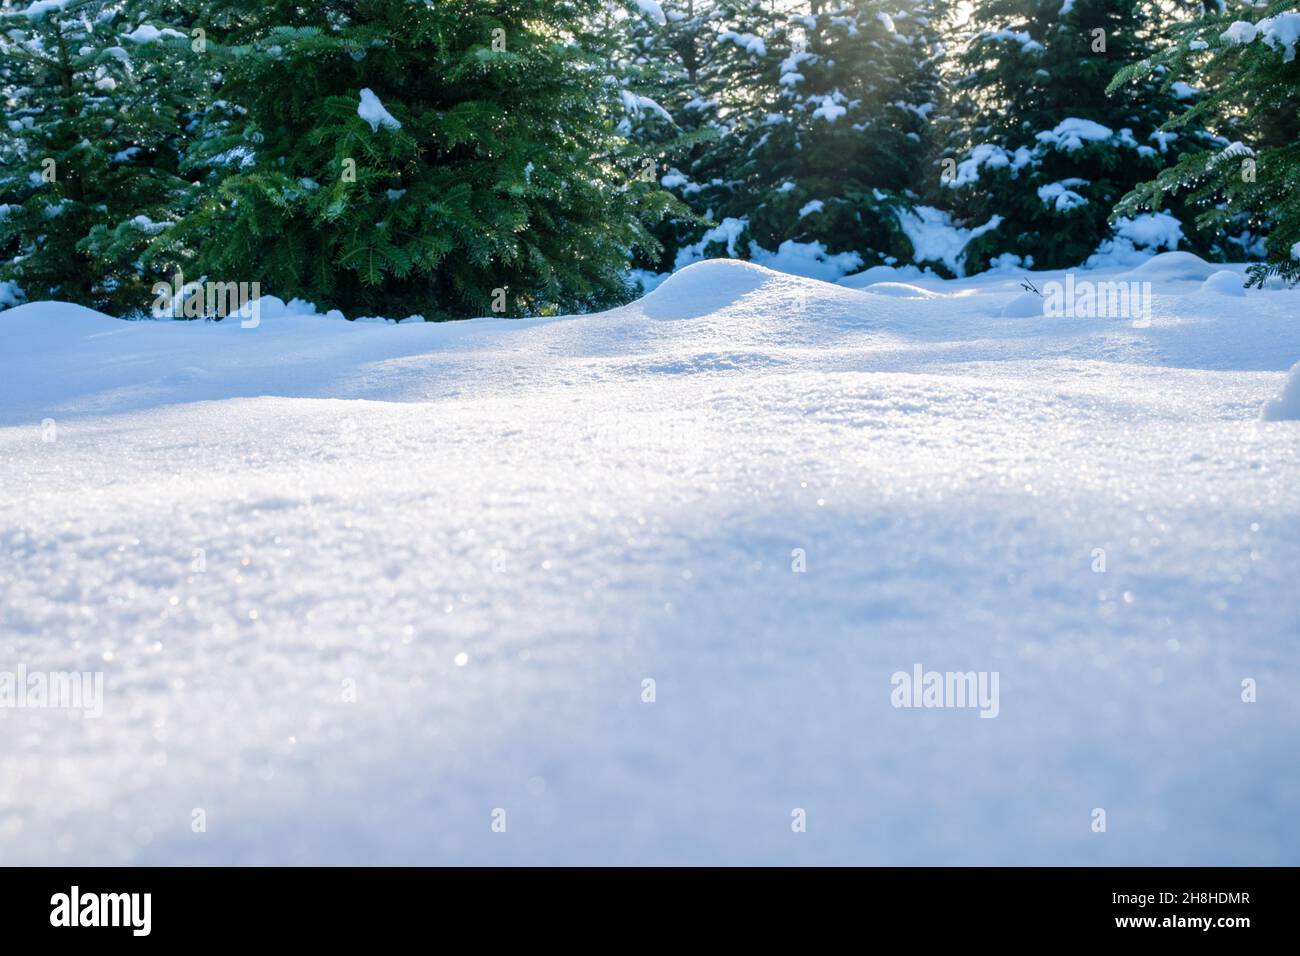 Idyllic winter background with freshly fallen untouched snow and fir trees at sunrise. Snow glittering in the sun. Low angle view, copy space. Stock Photo